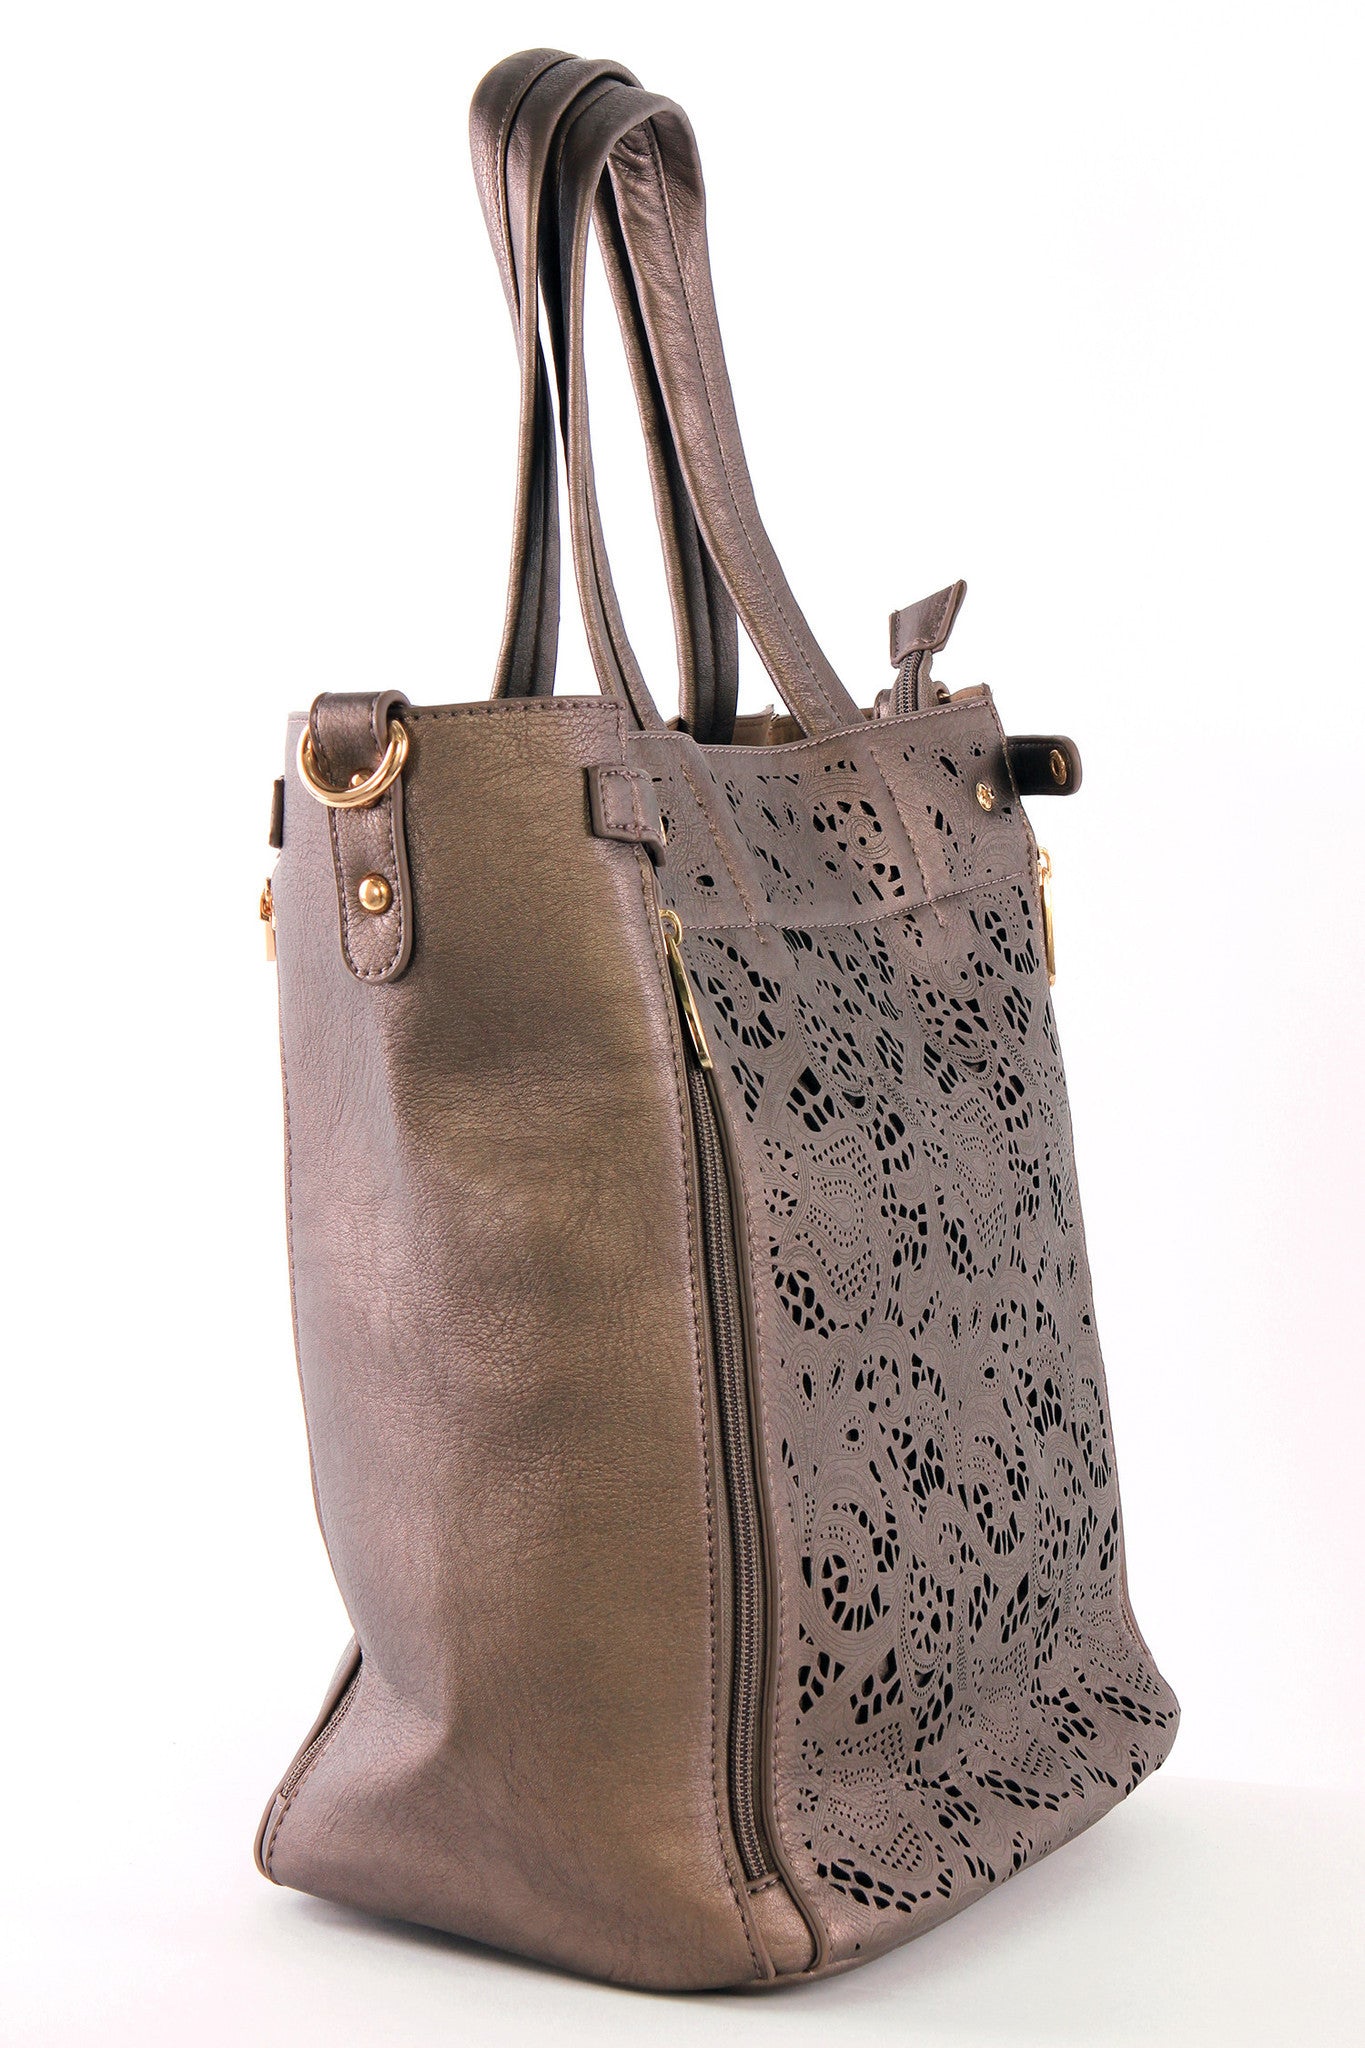 Lace Insert Tote Bag and Case